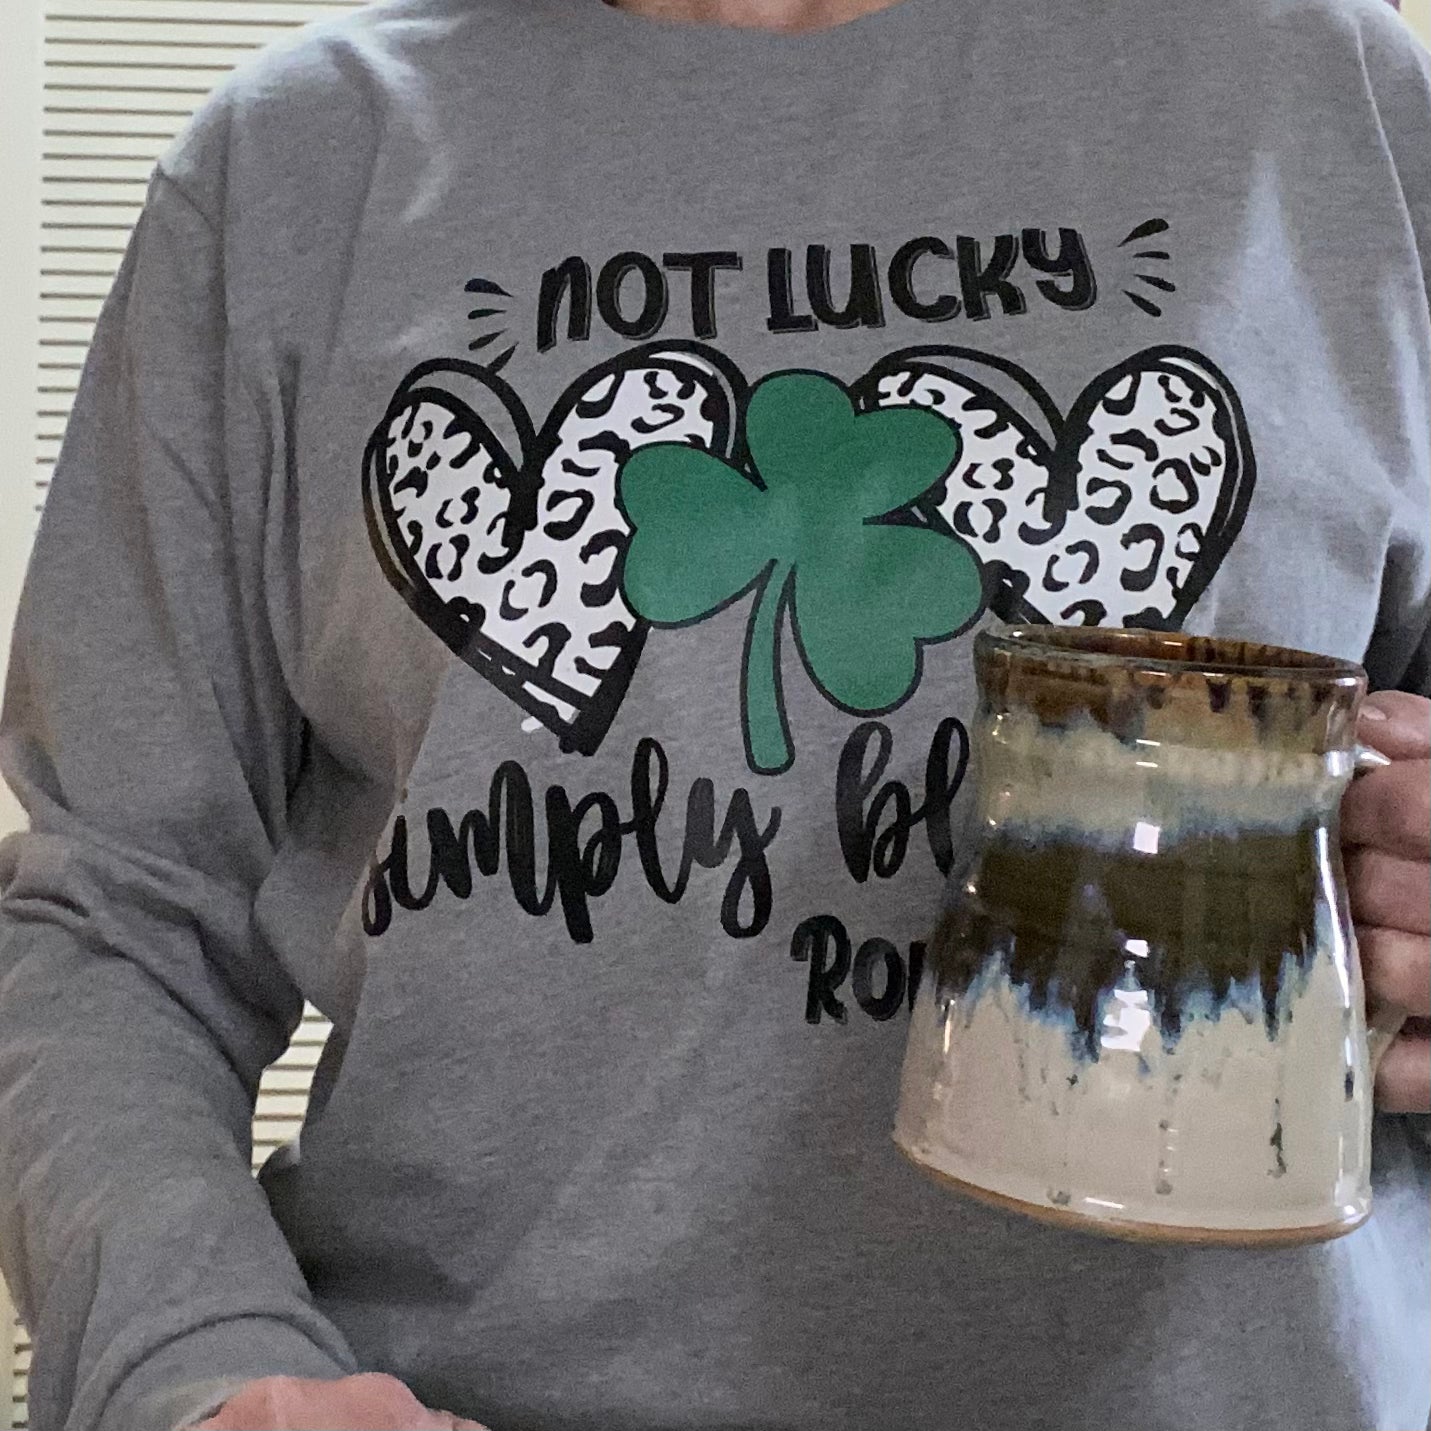 Not Lucky Just Blessed Tee Shirt St. Patrick's Day